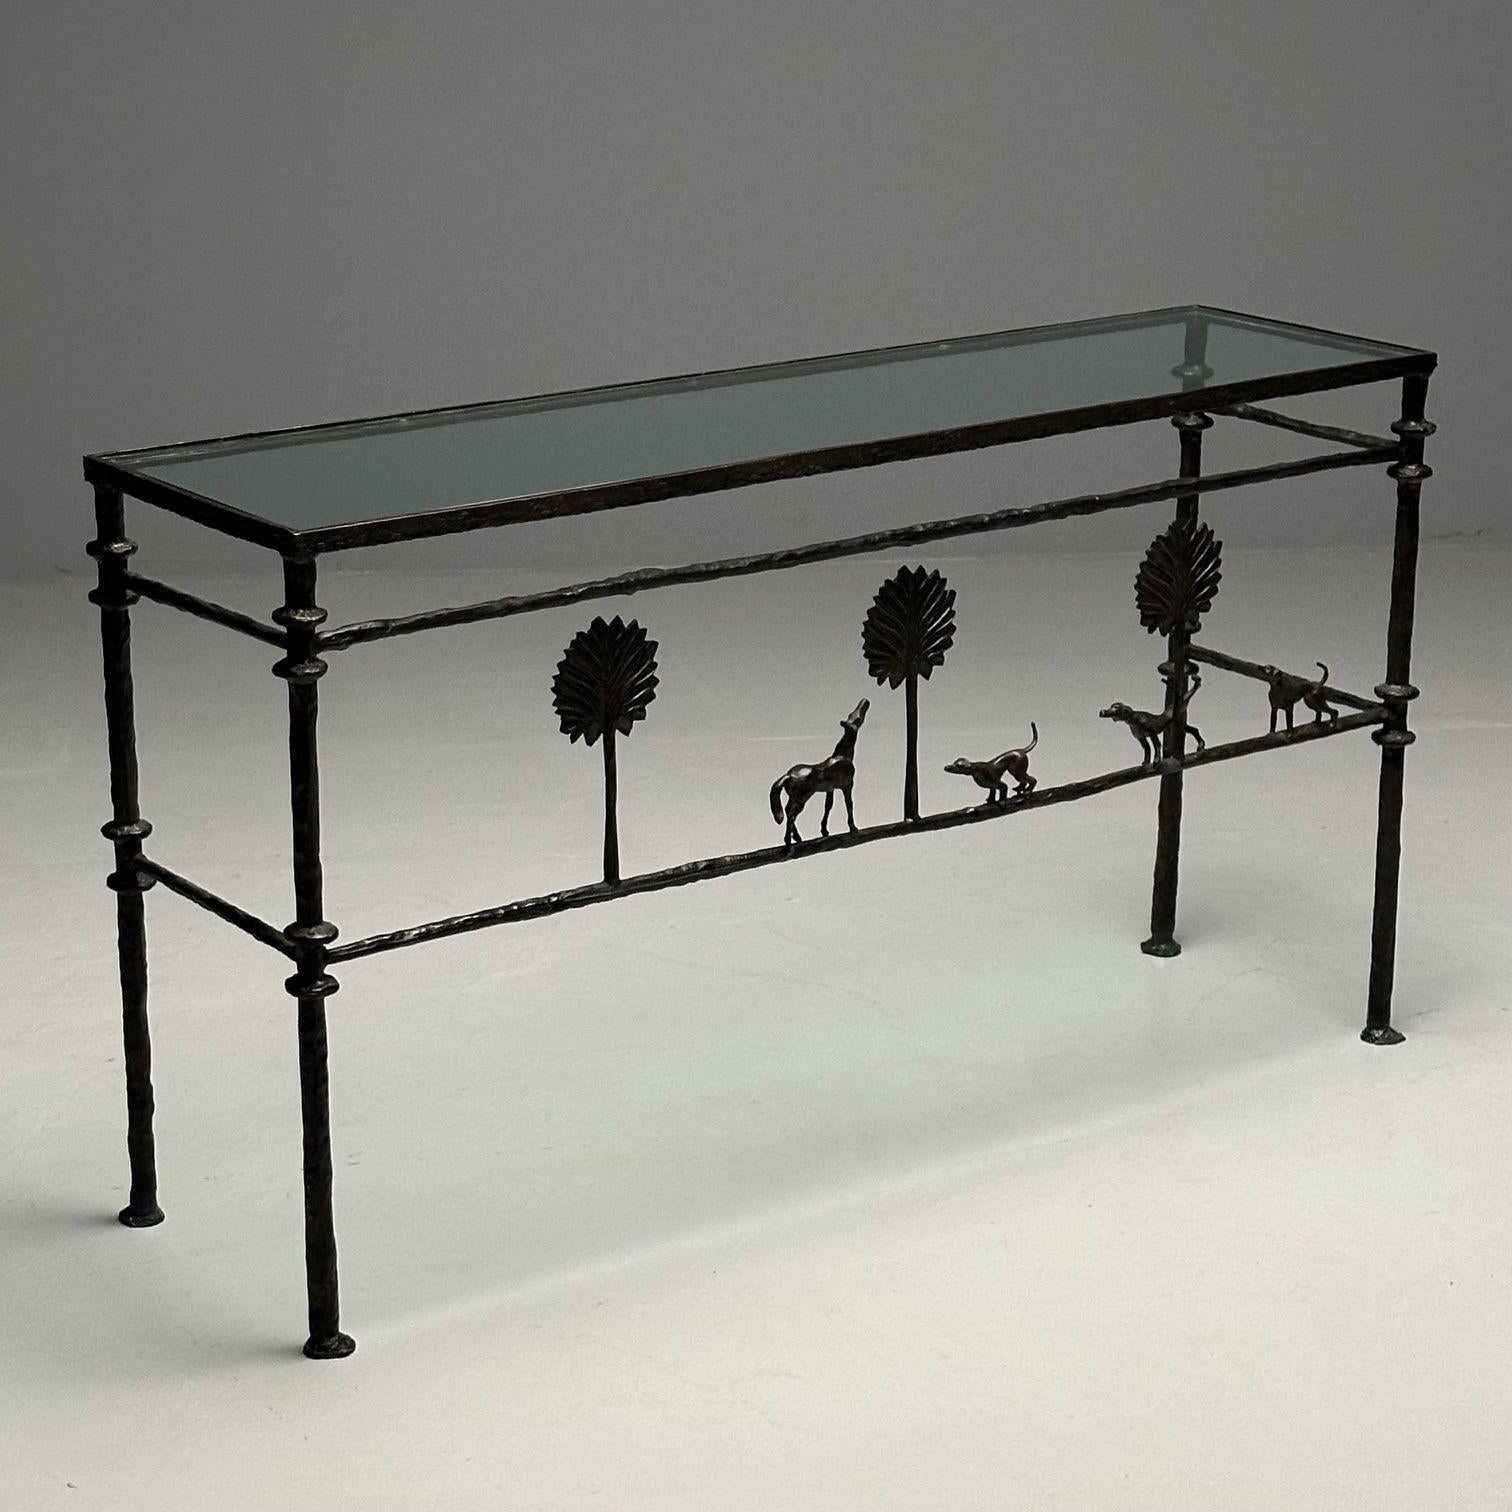 Giacometti Style, Mid-Century Modern, Console Table, Iron, Glass, Dog, Horse and Tree of Life Motif

A stunning wrought iron console with a thick glass top in fine condition. Its clean, simple lines are undeniably modern in design and contrast with